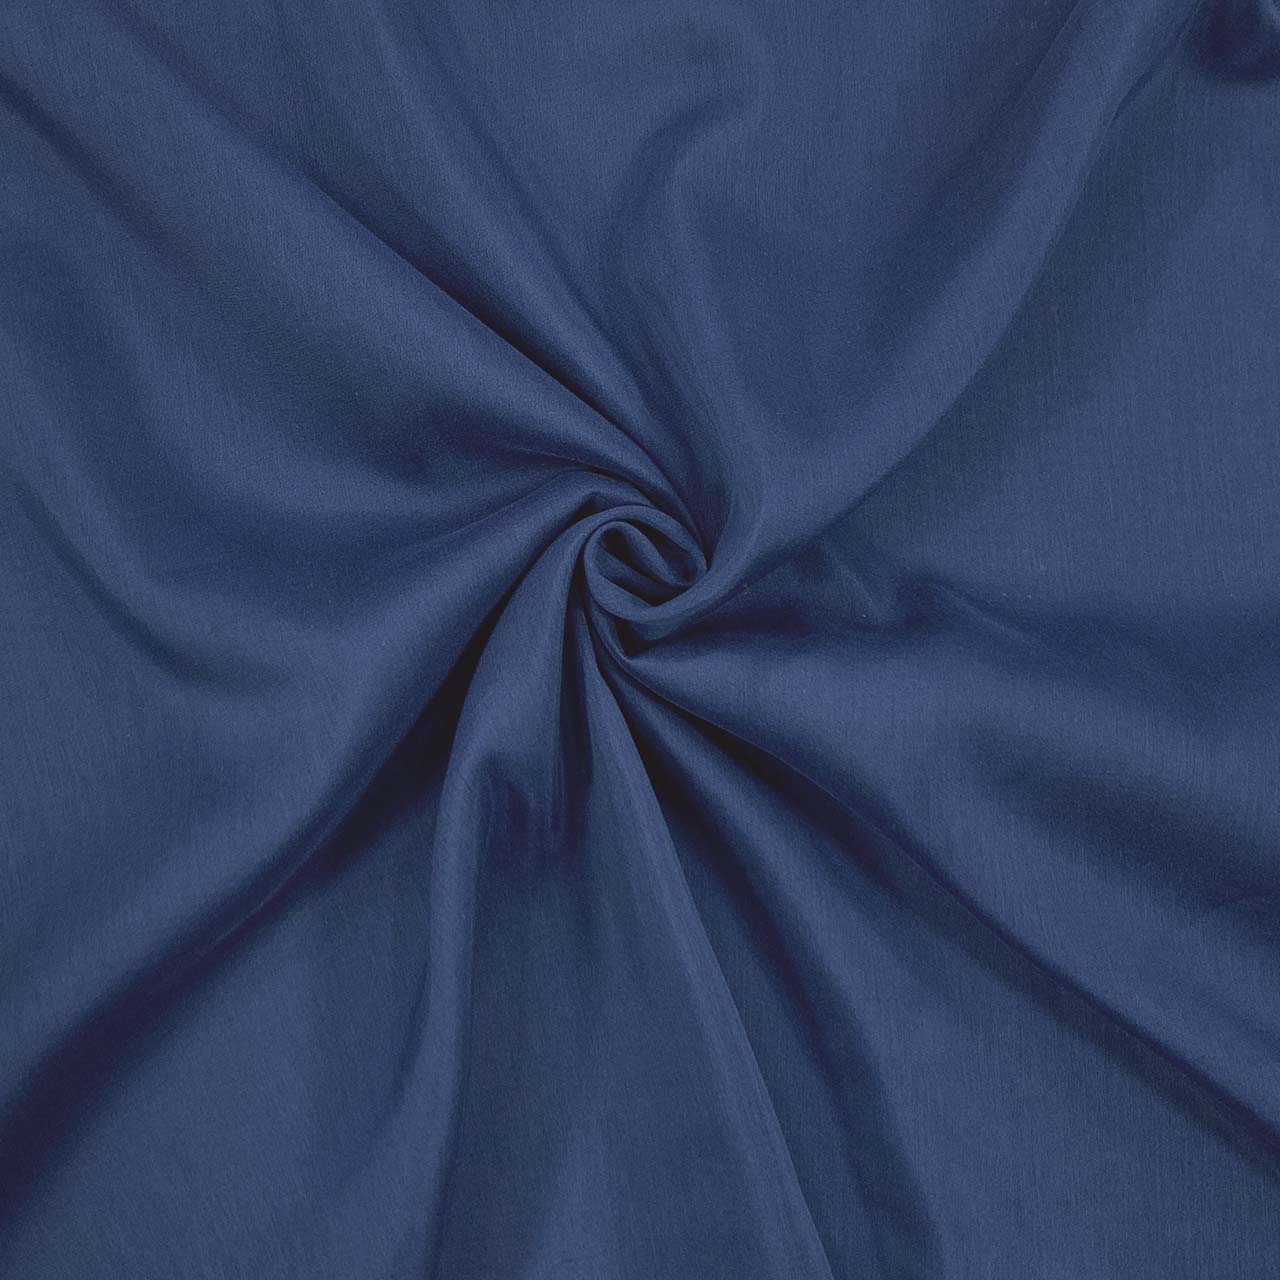 silk cotton fabric navy voile fabric collection